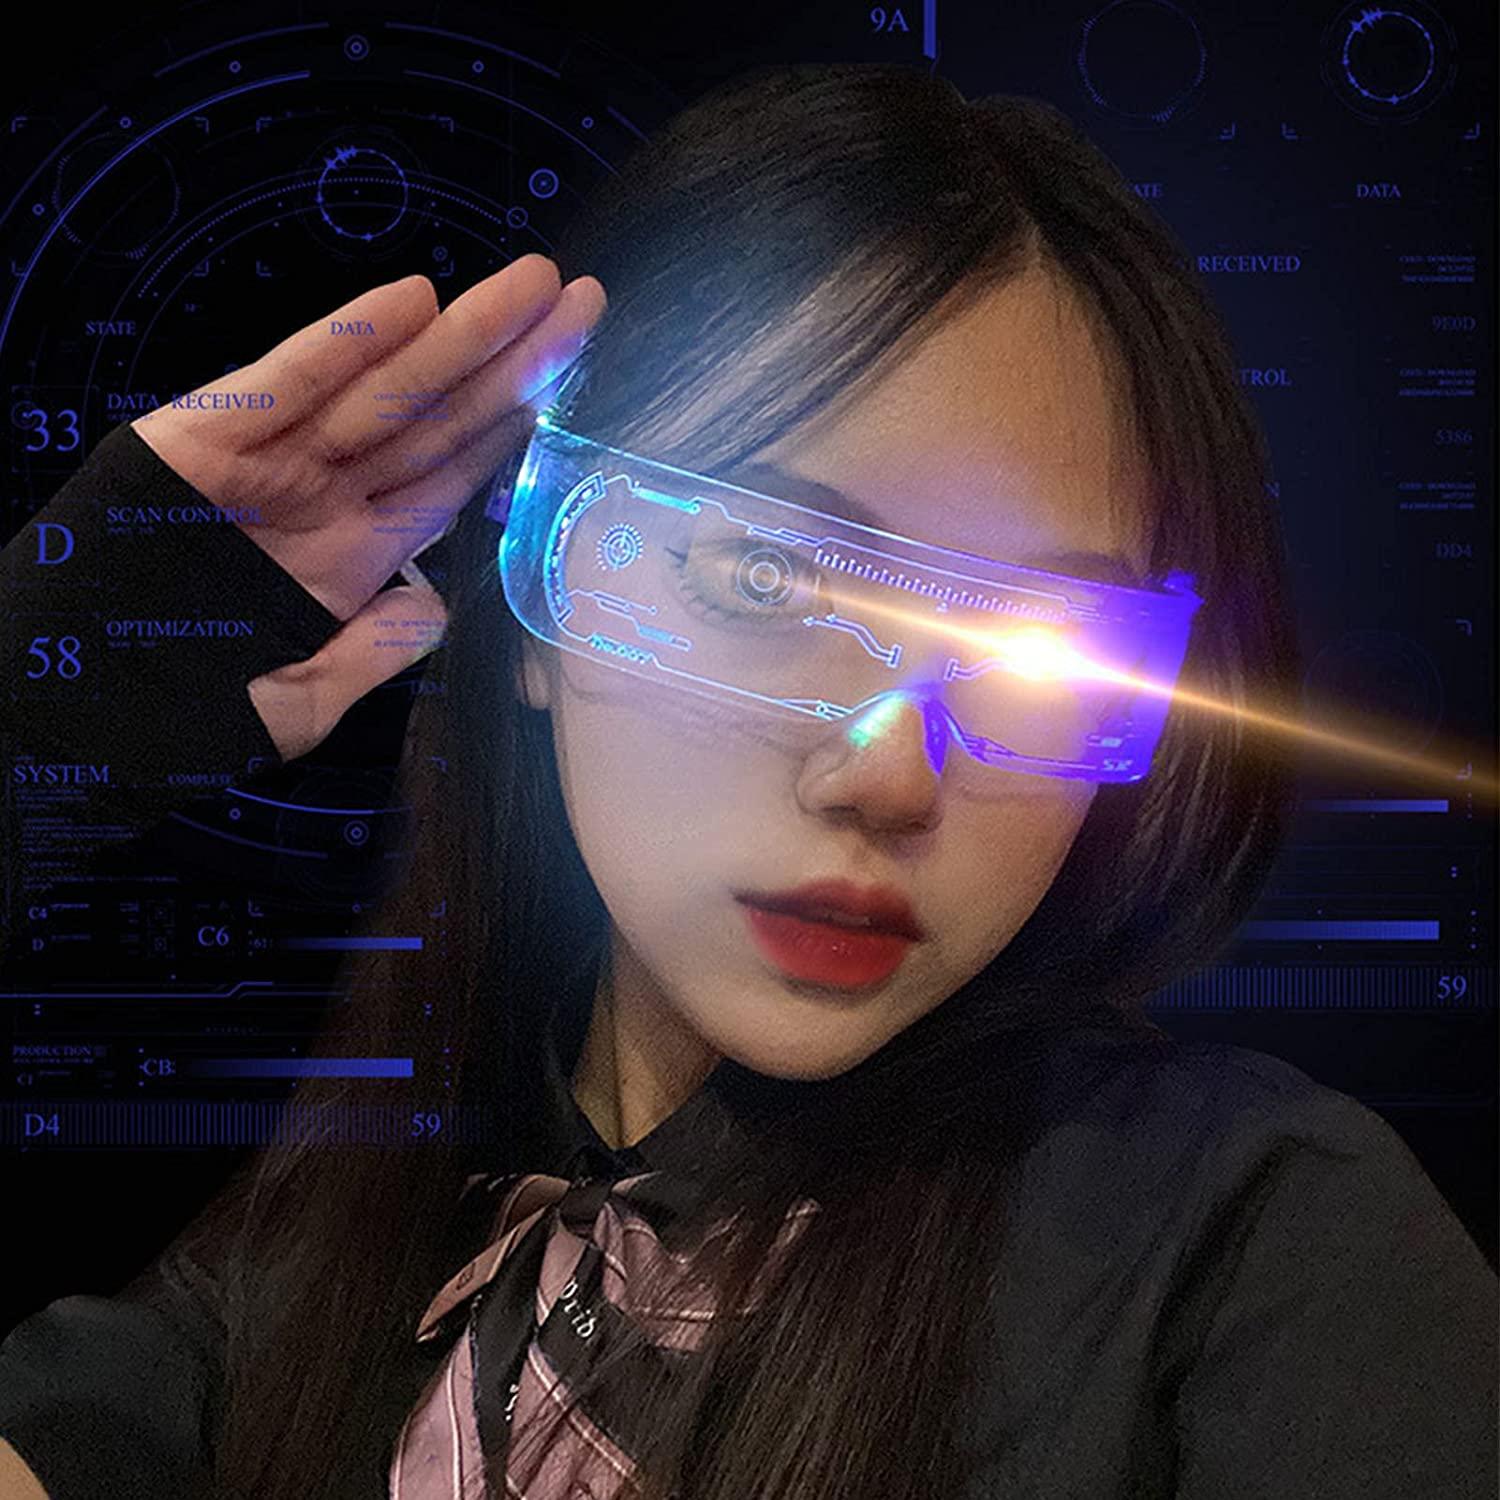 LED Visor Glasses Cyberpunk, Light Up Glasses with 7 Colors and 5 Modes, Luminous Glasses for Cosplay Halloween - Lasercutwraps Shop